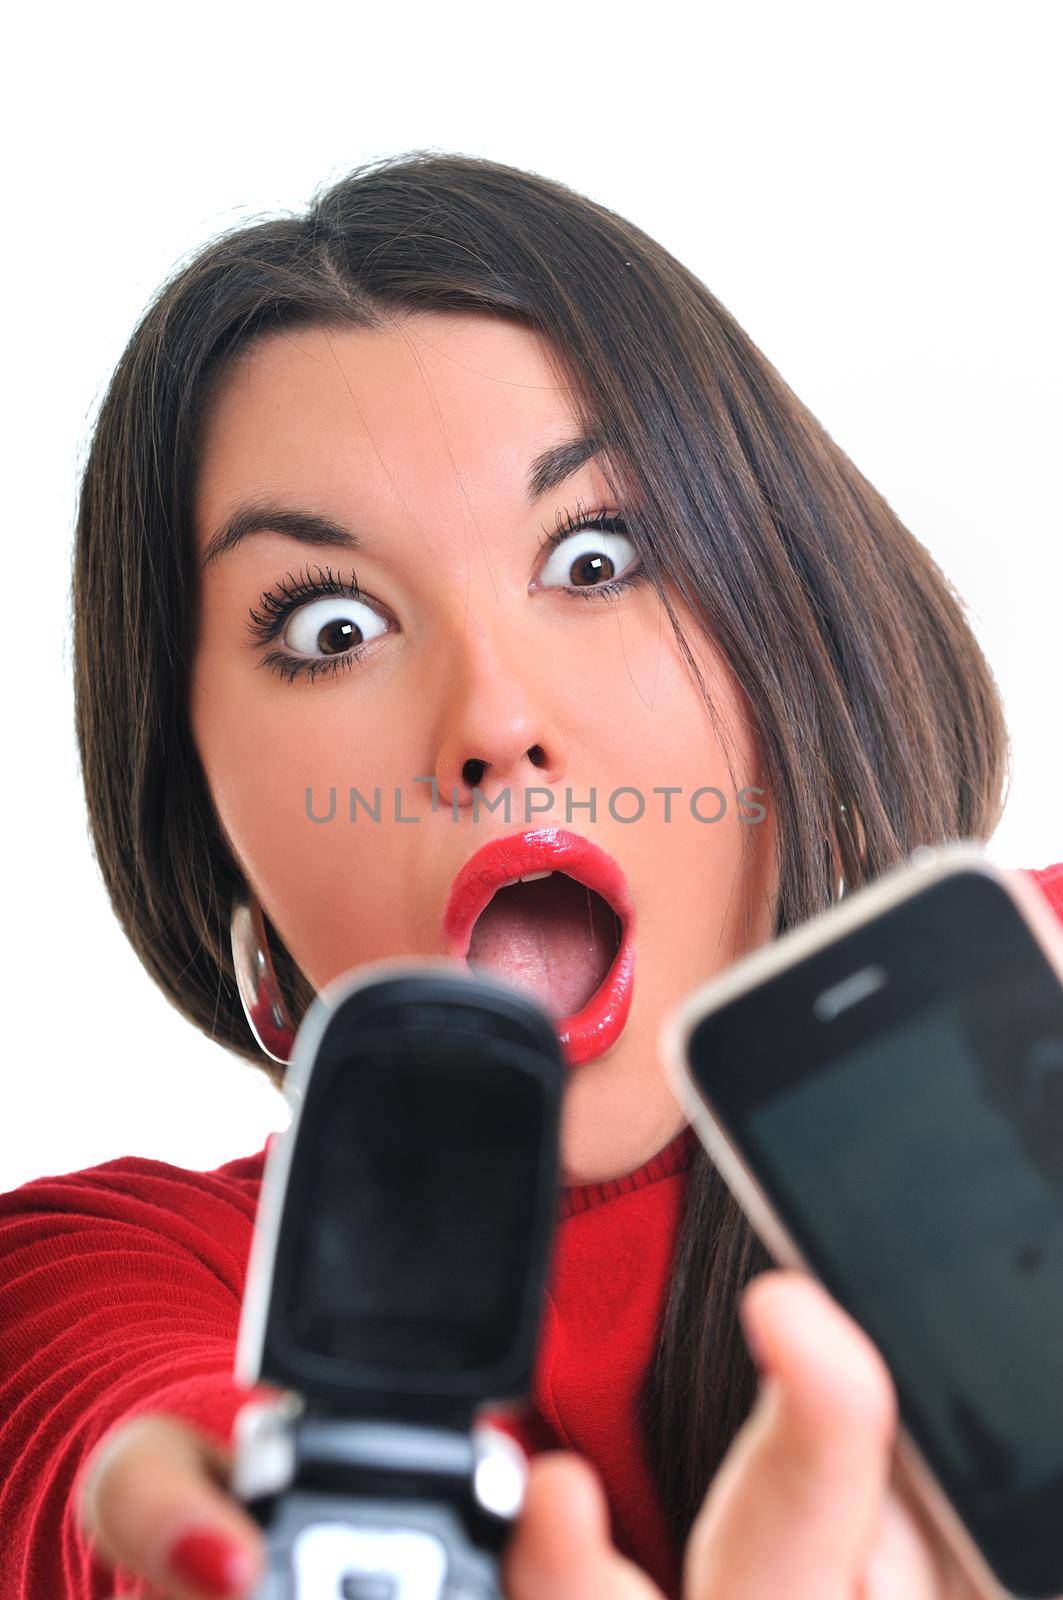 young business woman in red isolated on white talking on cell phone